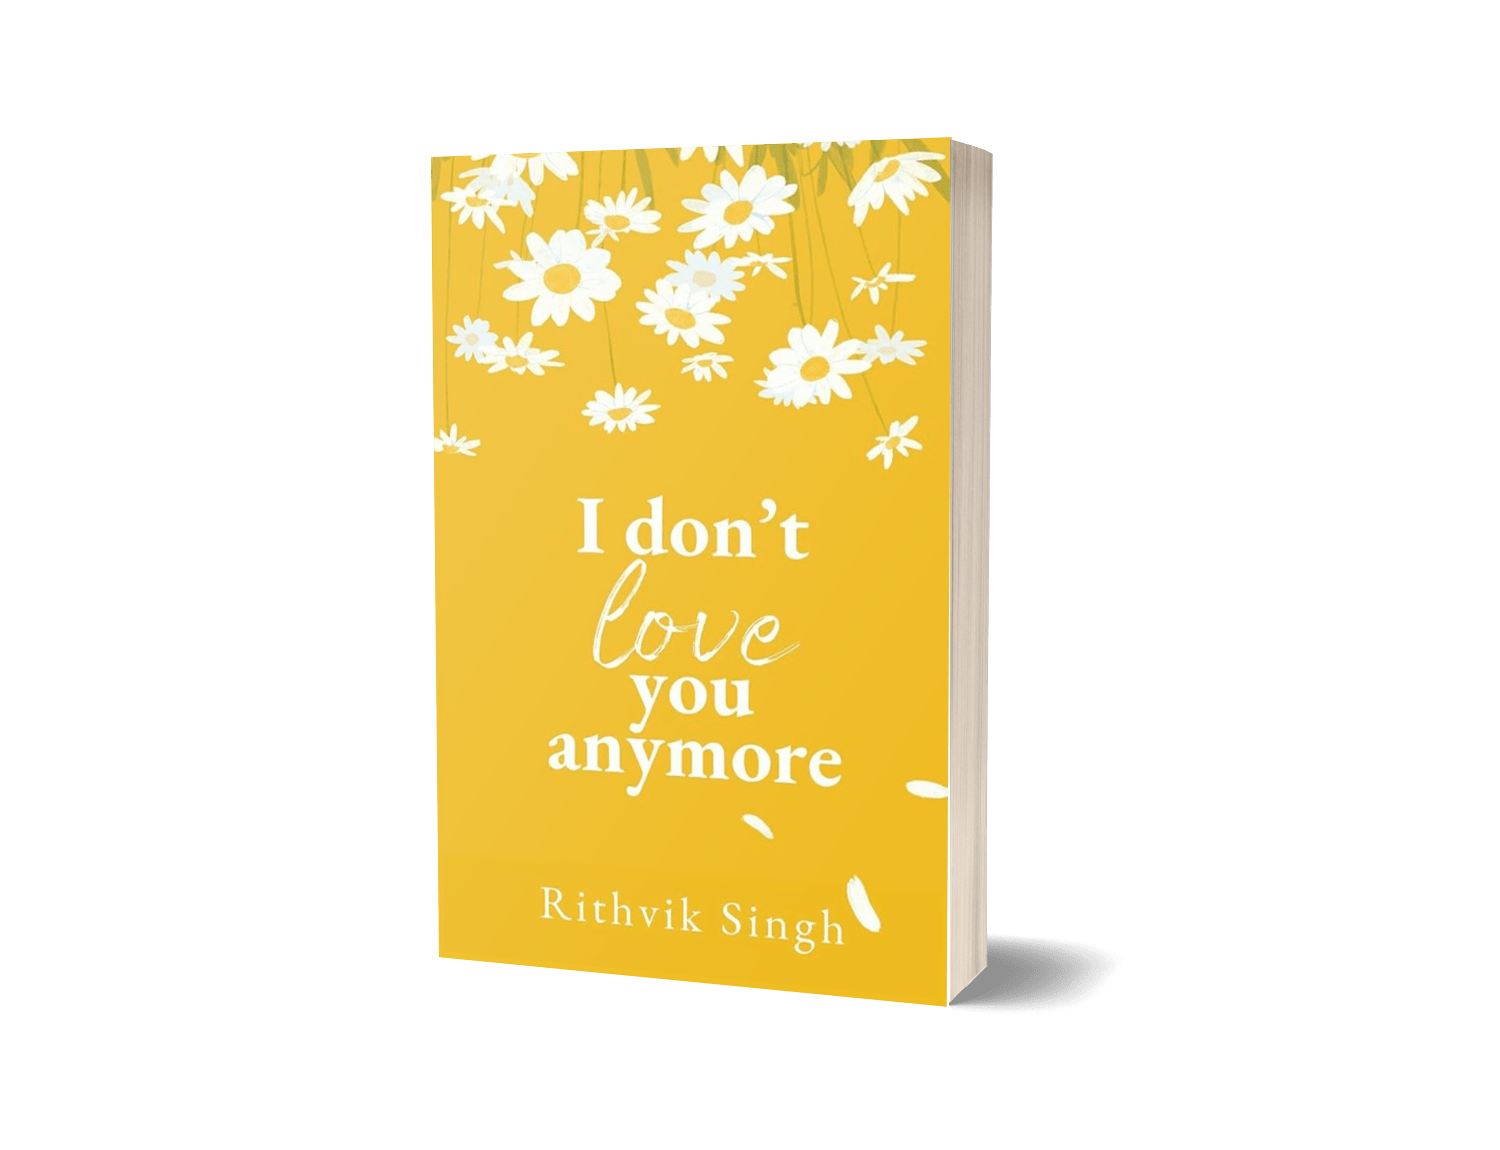 I Don’t Love You Anymore by Rithvik Singh